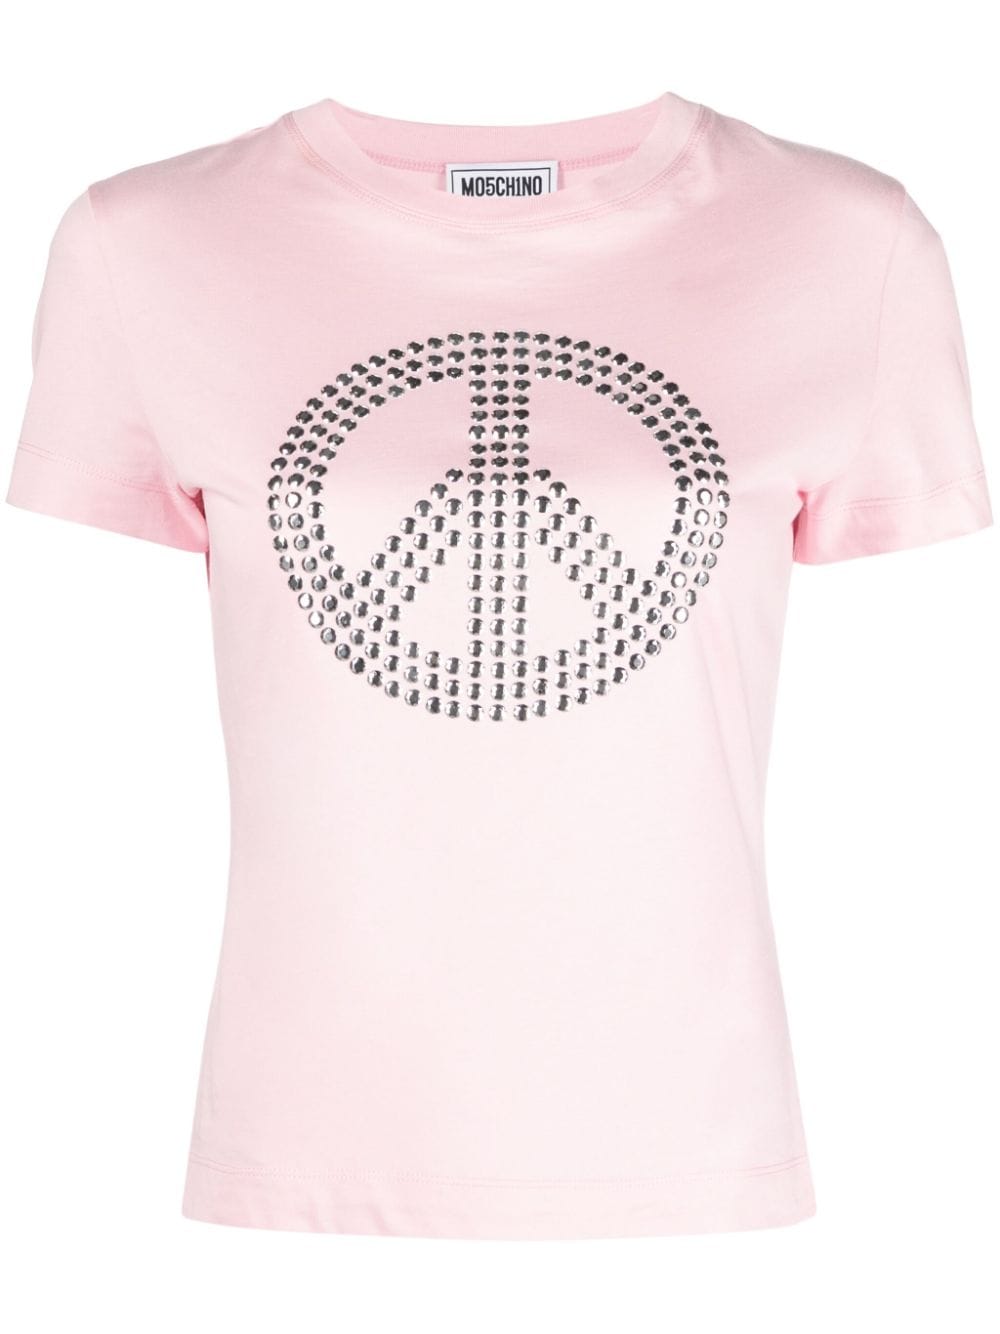 MOSCHINO JEANS peace sign-motif T-shirt - Pink von MOSCHINO JEANS